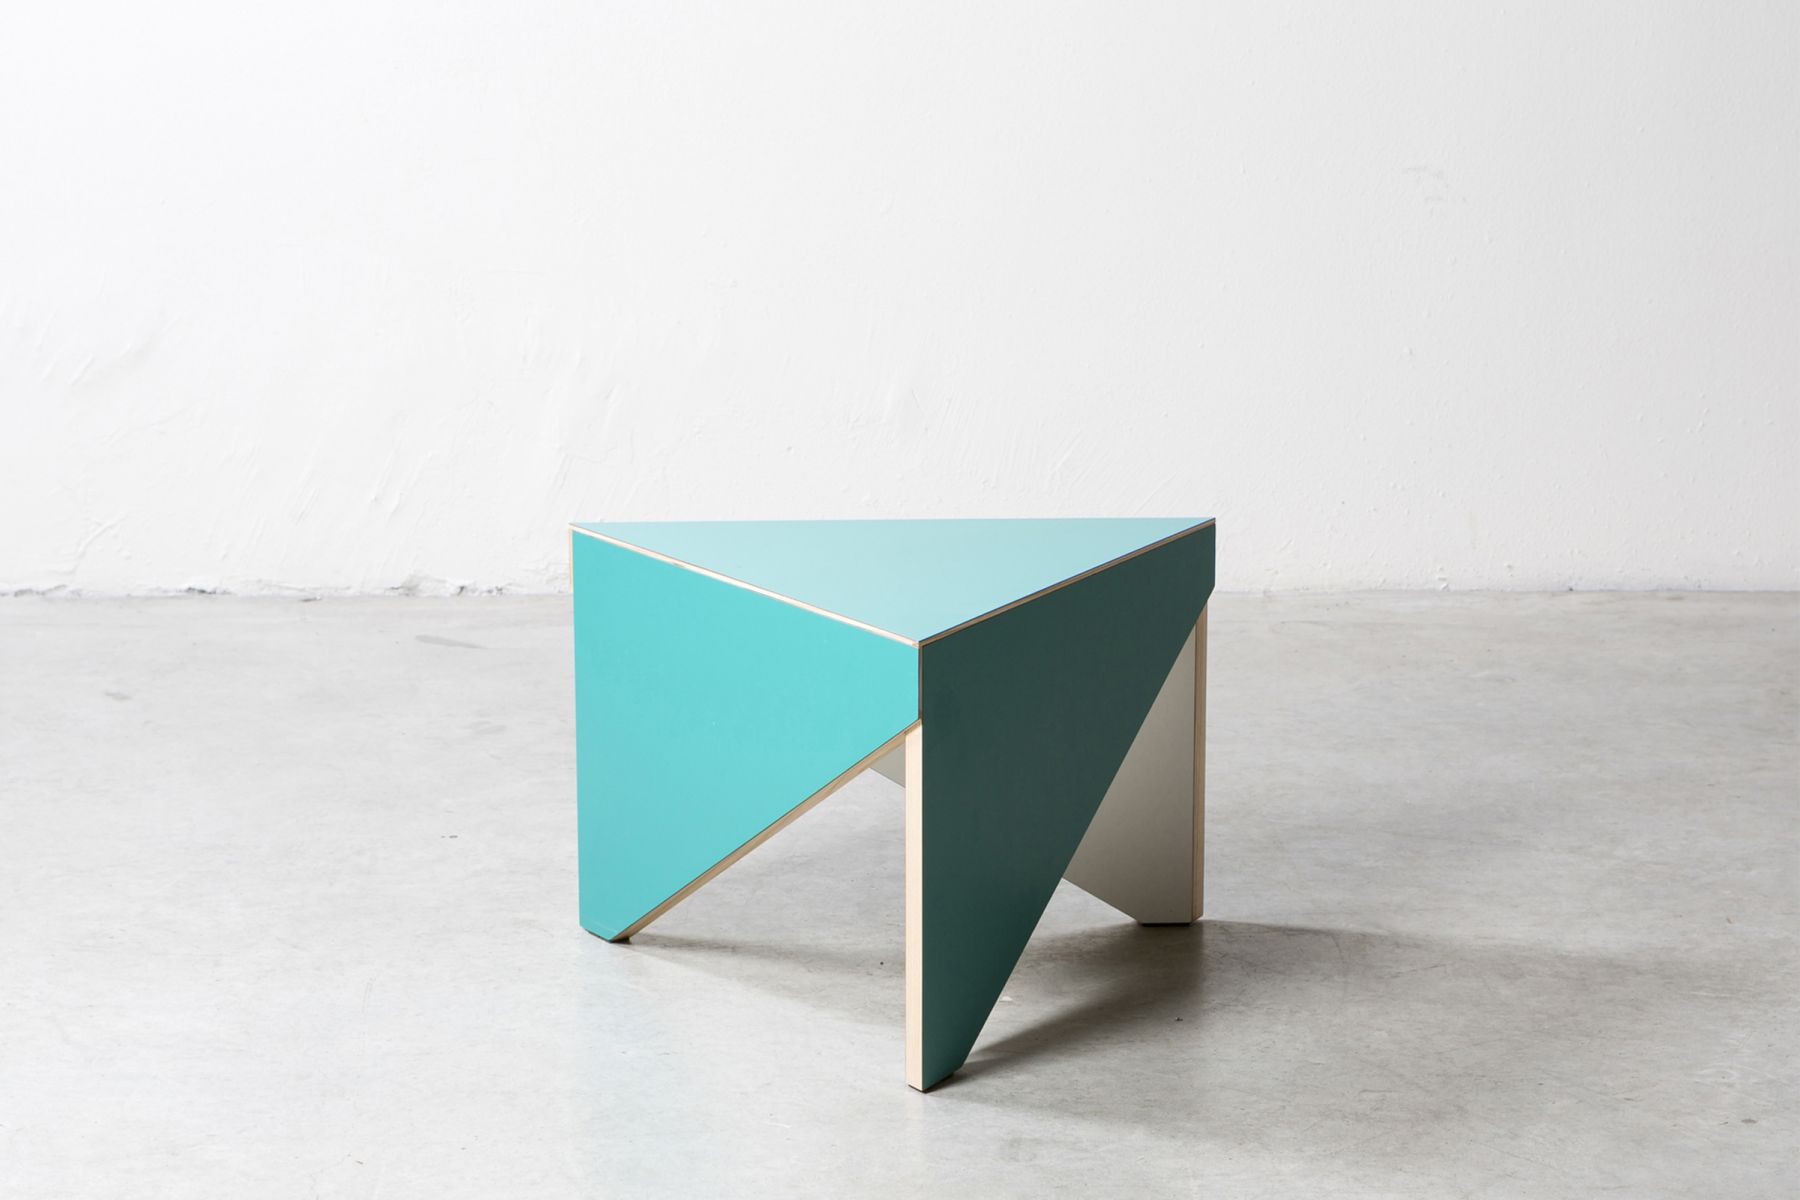 Two low tables Martino Gamper pic-3